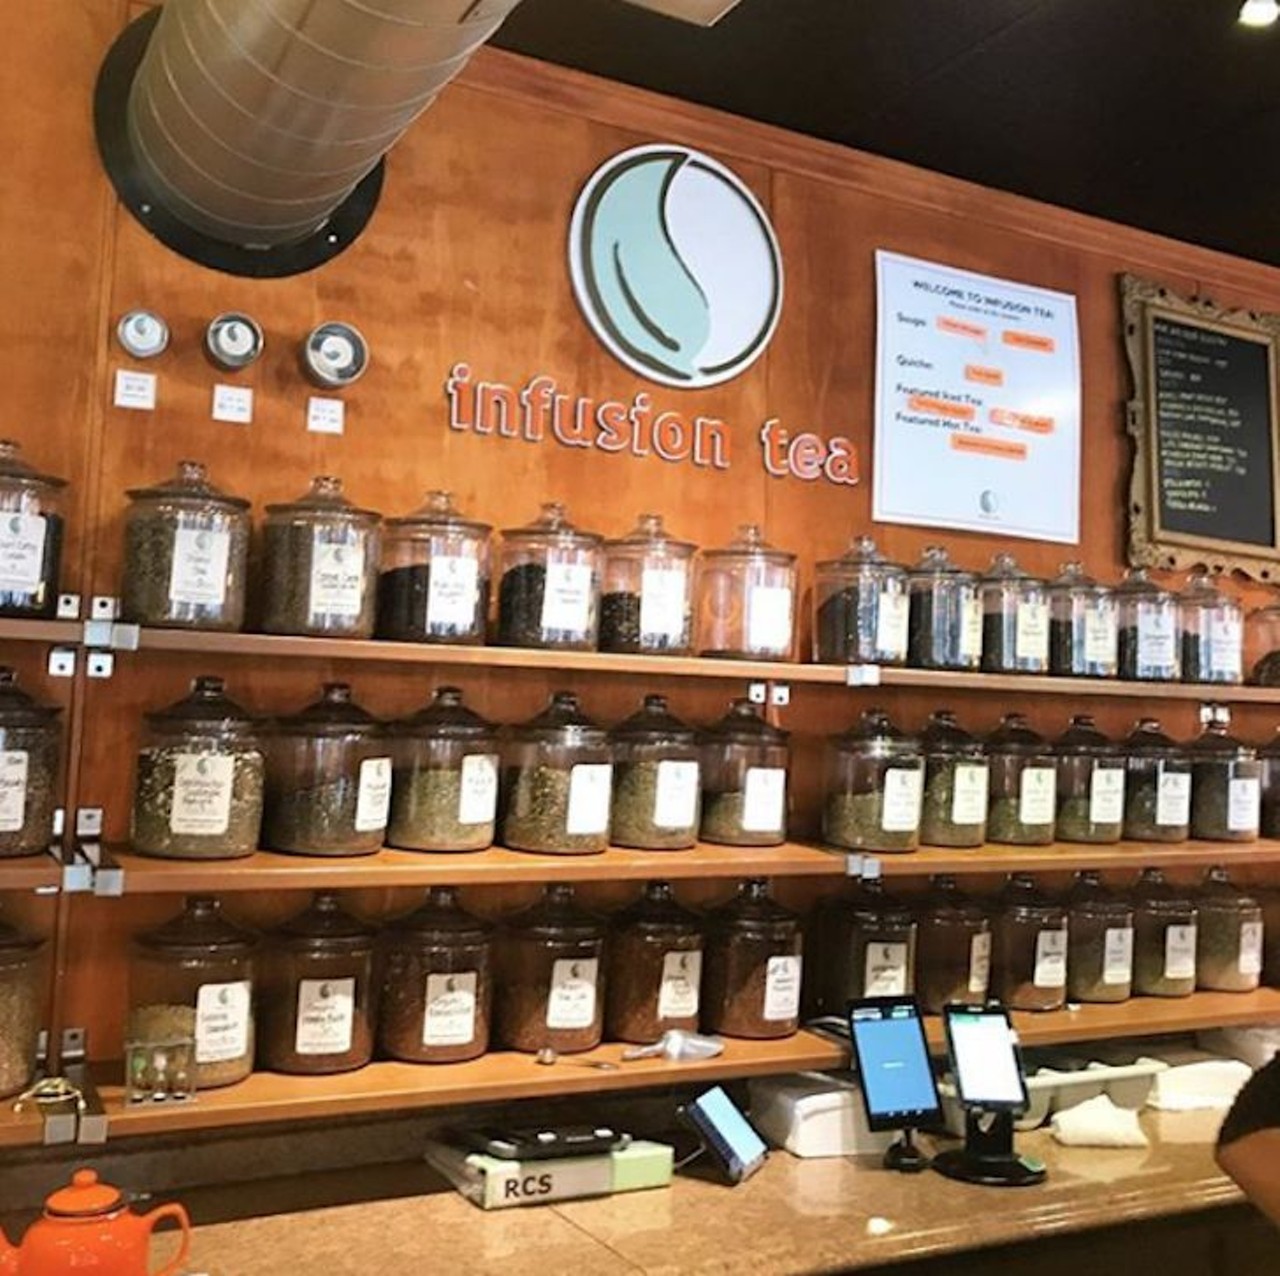 Infusion Tea
1600 Edgewater Drive, 407-999-5255
Christina Cowherd got the idea for Infusion Tea while serving in the Peace Corps in Guatemala with her husband, Brad. Infusion Tea offers handpicked and organically sourced teas from around the world.
Photo via weekendwarriororlando/Instagram